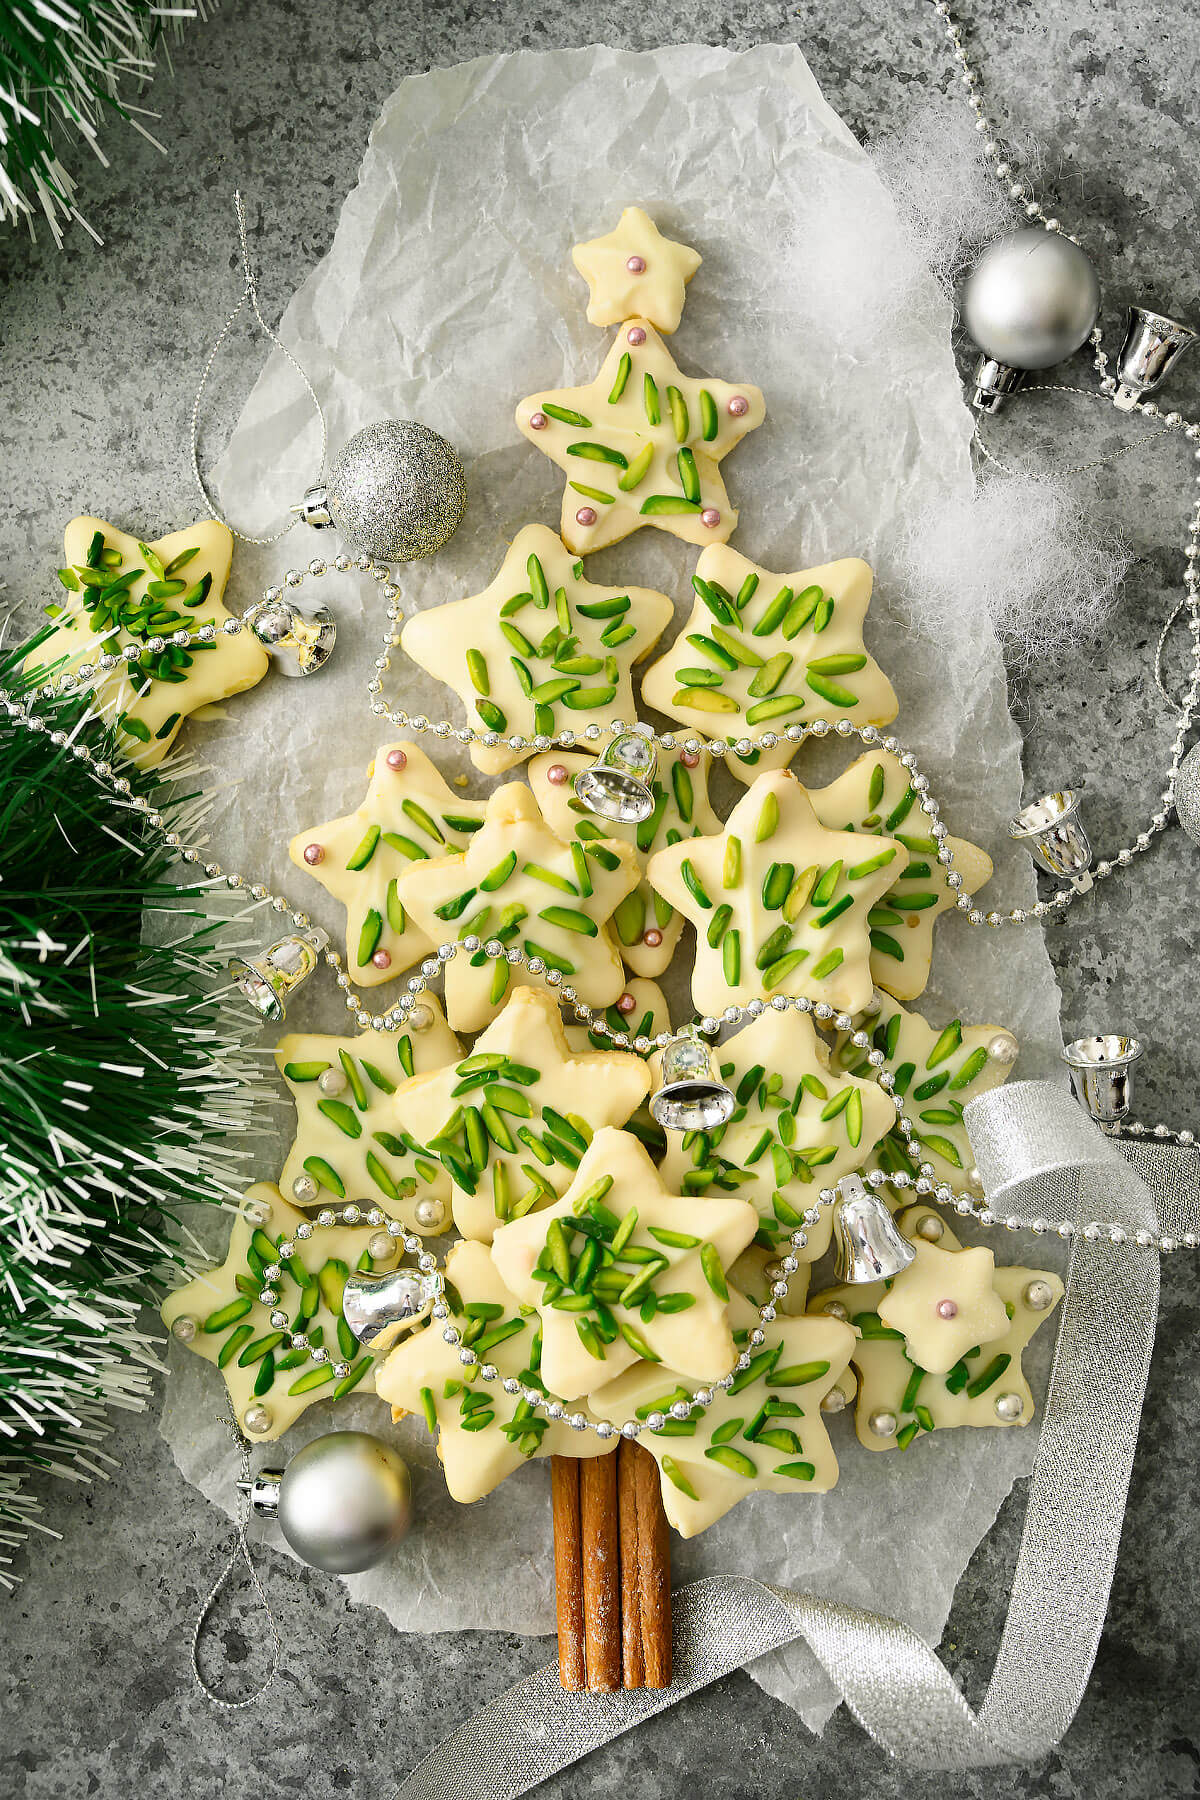 Sugar star cookies decorated with pistachios and silver dragées arranged as a Christmas tree..